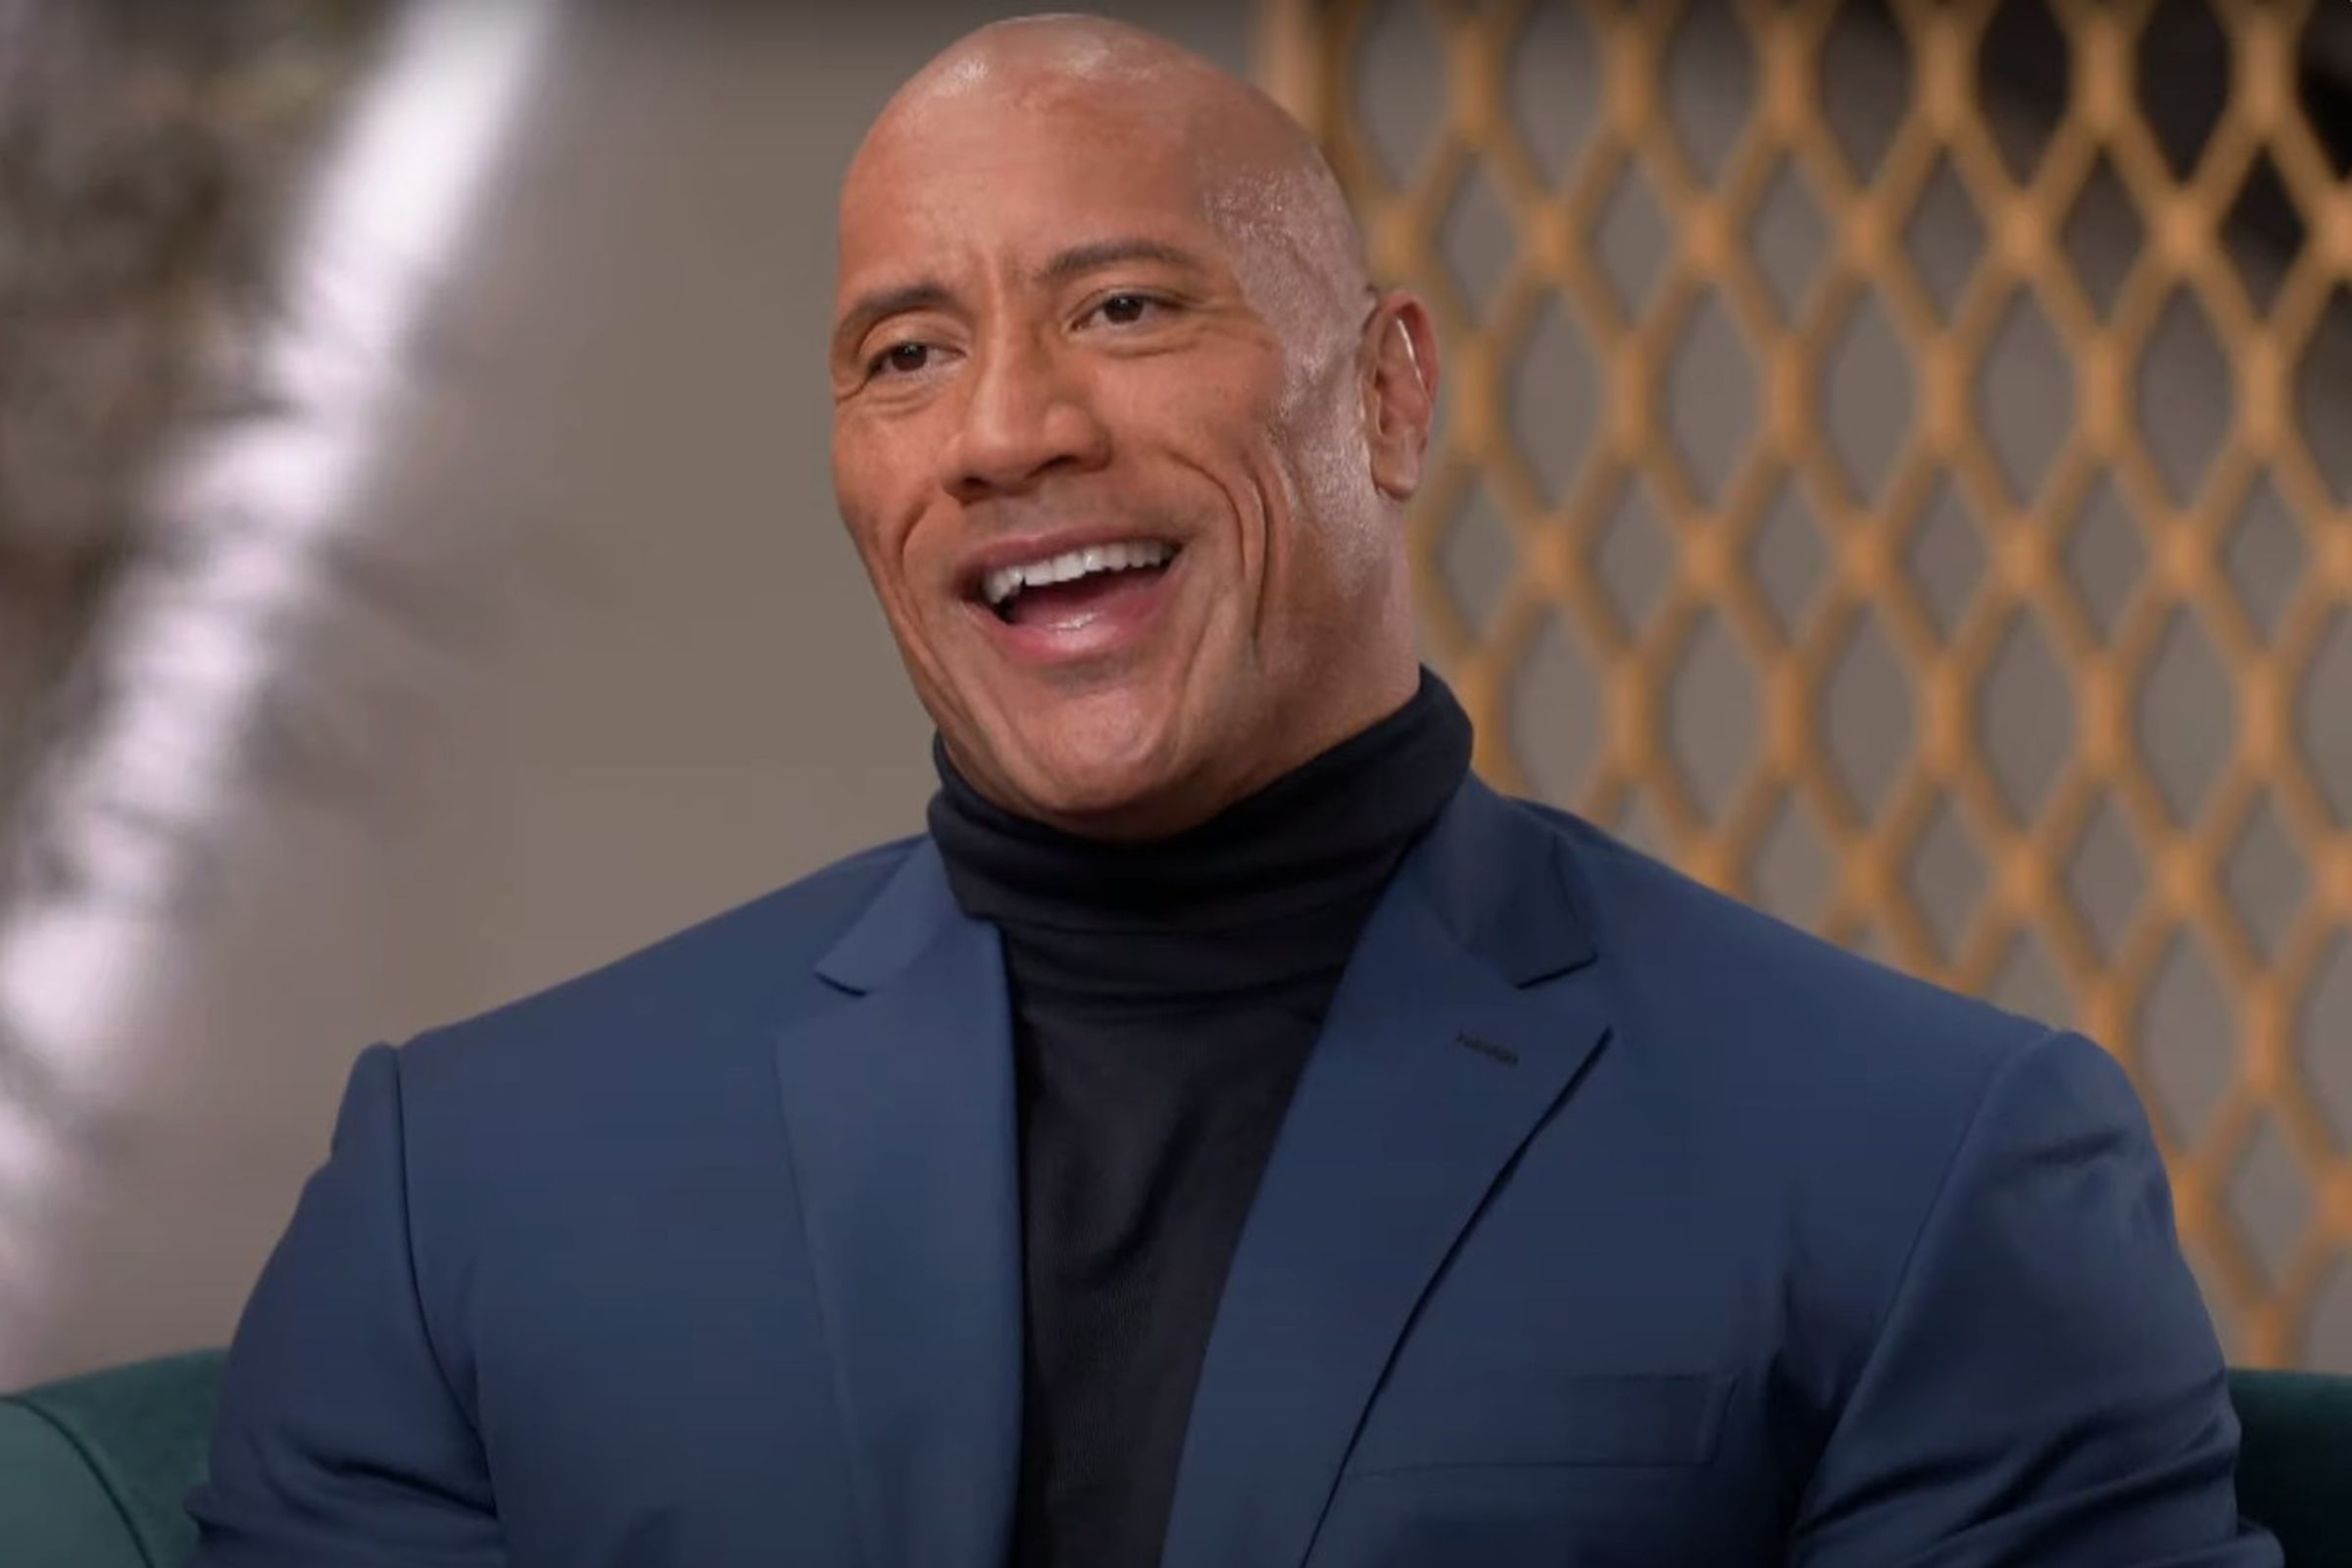 Dwayne Johnson in Young Rock